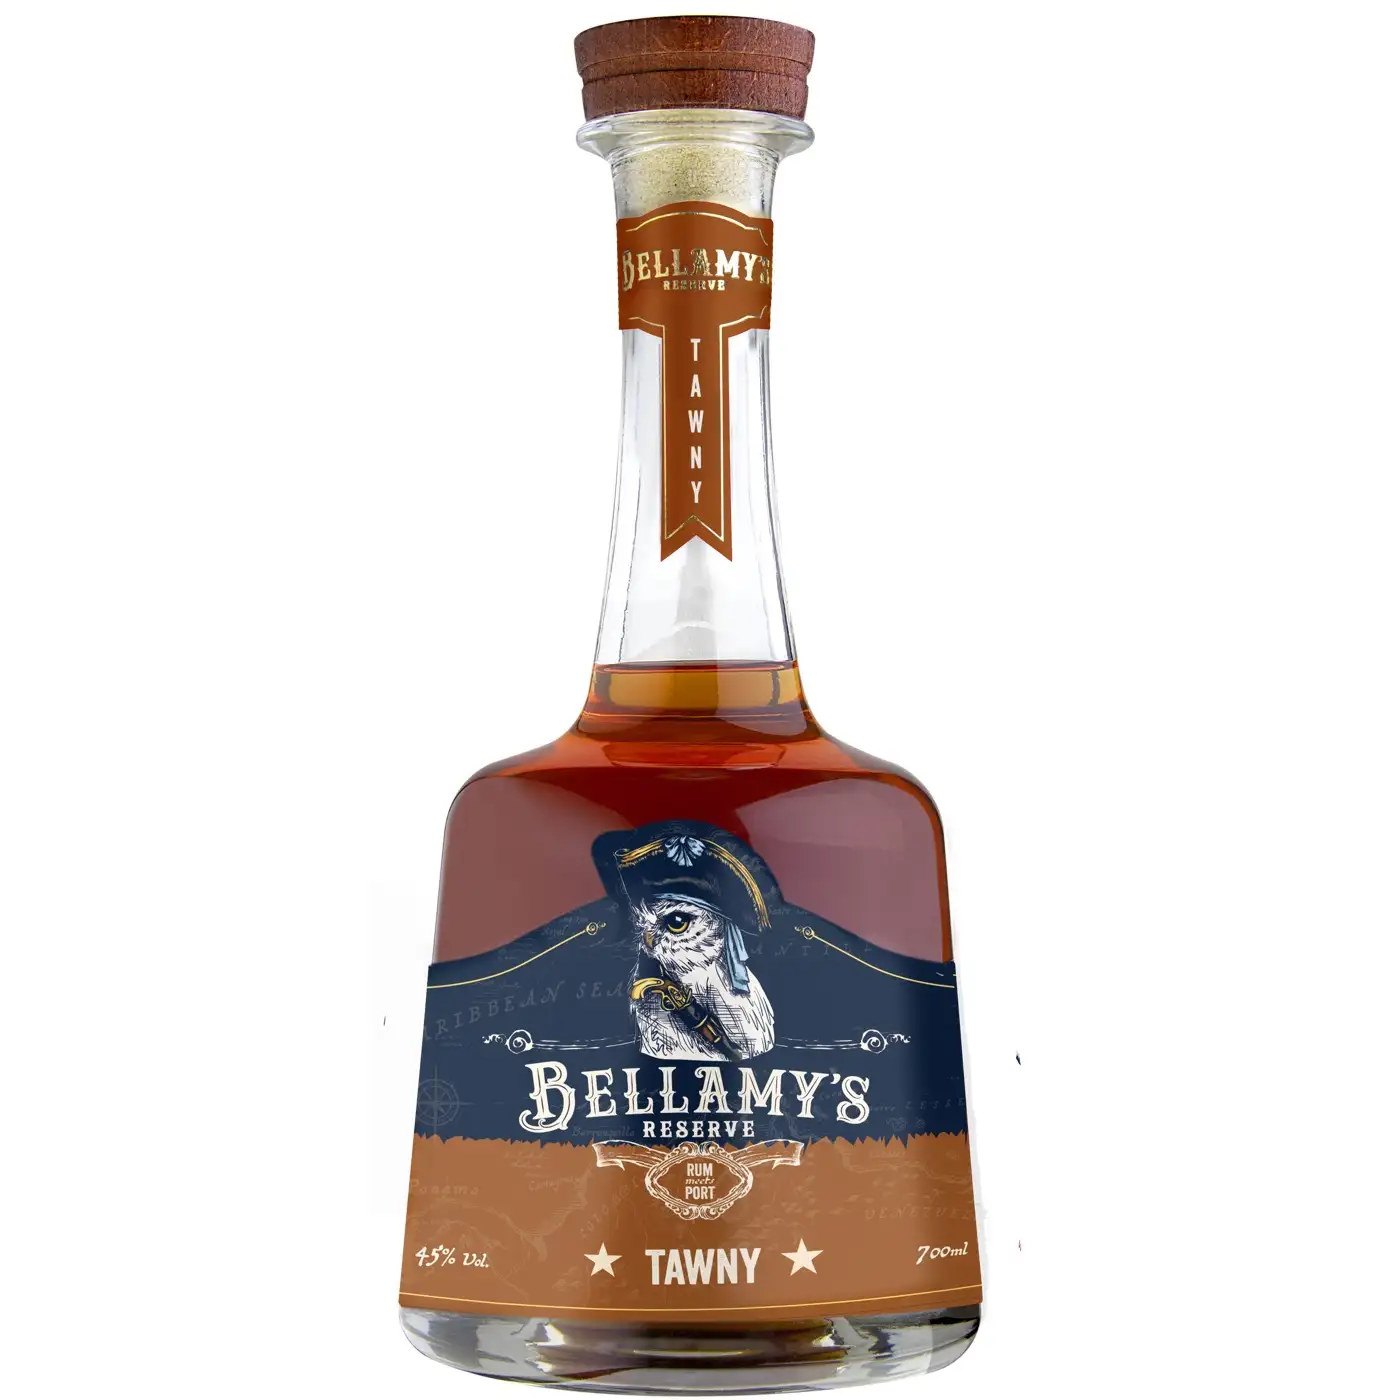 Image of the front of the bottle of the rum Bellamy‘s Reserve Tawny Rum Meets Port